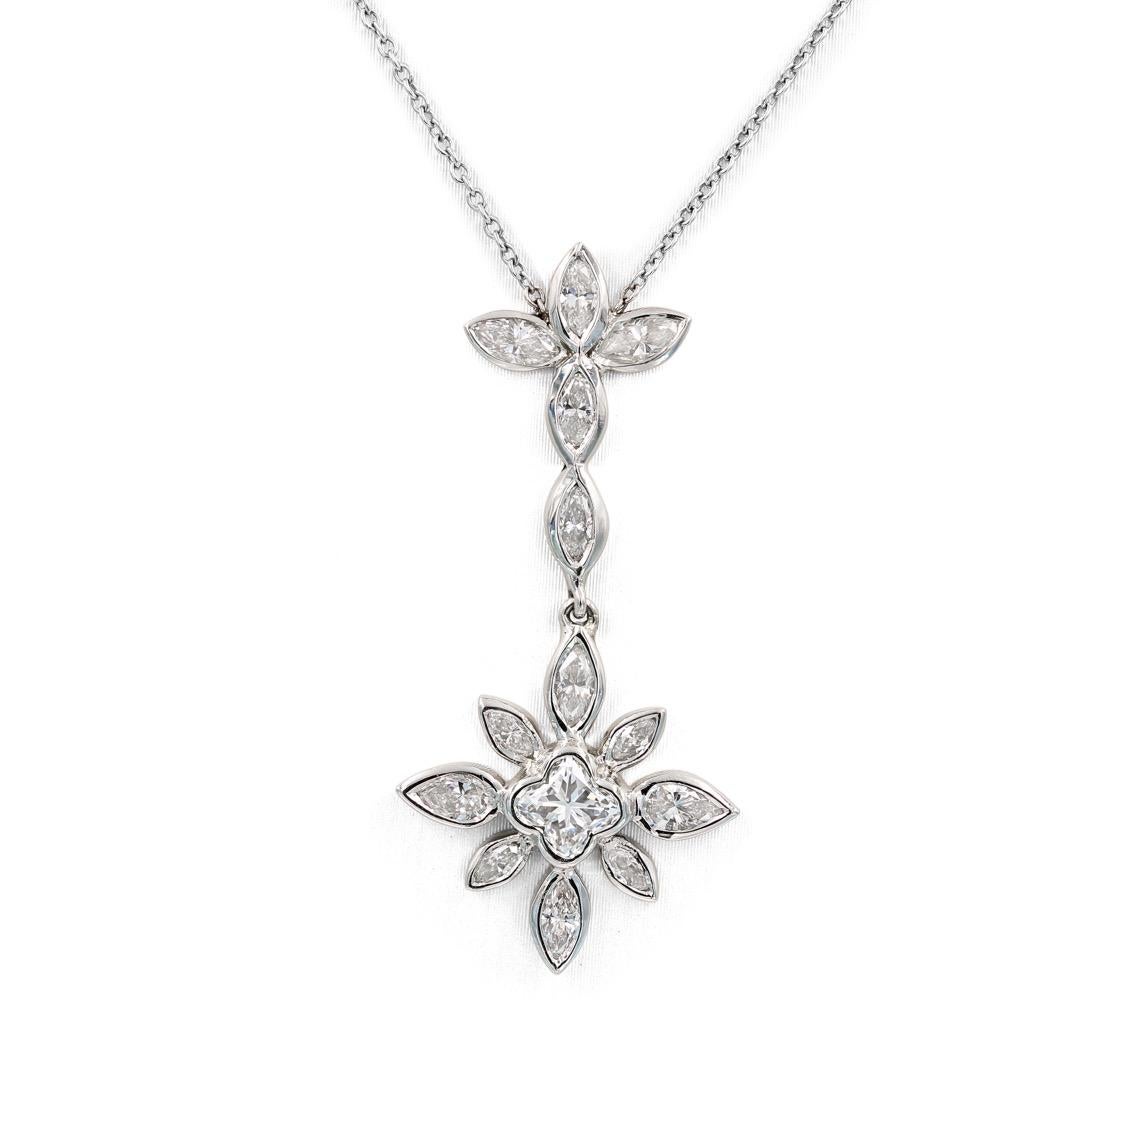 This Lester Lampert original flower pendant in 18kt. white gold contains a center lilly cut diamond = .43ct, 11 marquise diamonds = .83ct. t.w., and 2 pear shaped diamonds = .22ct. t.w. All diamonds are G in color and VS in clarity. 

The necklace